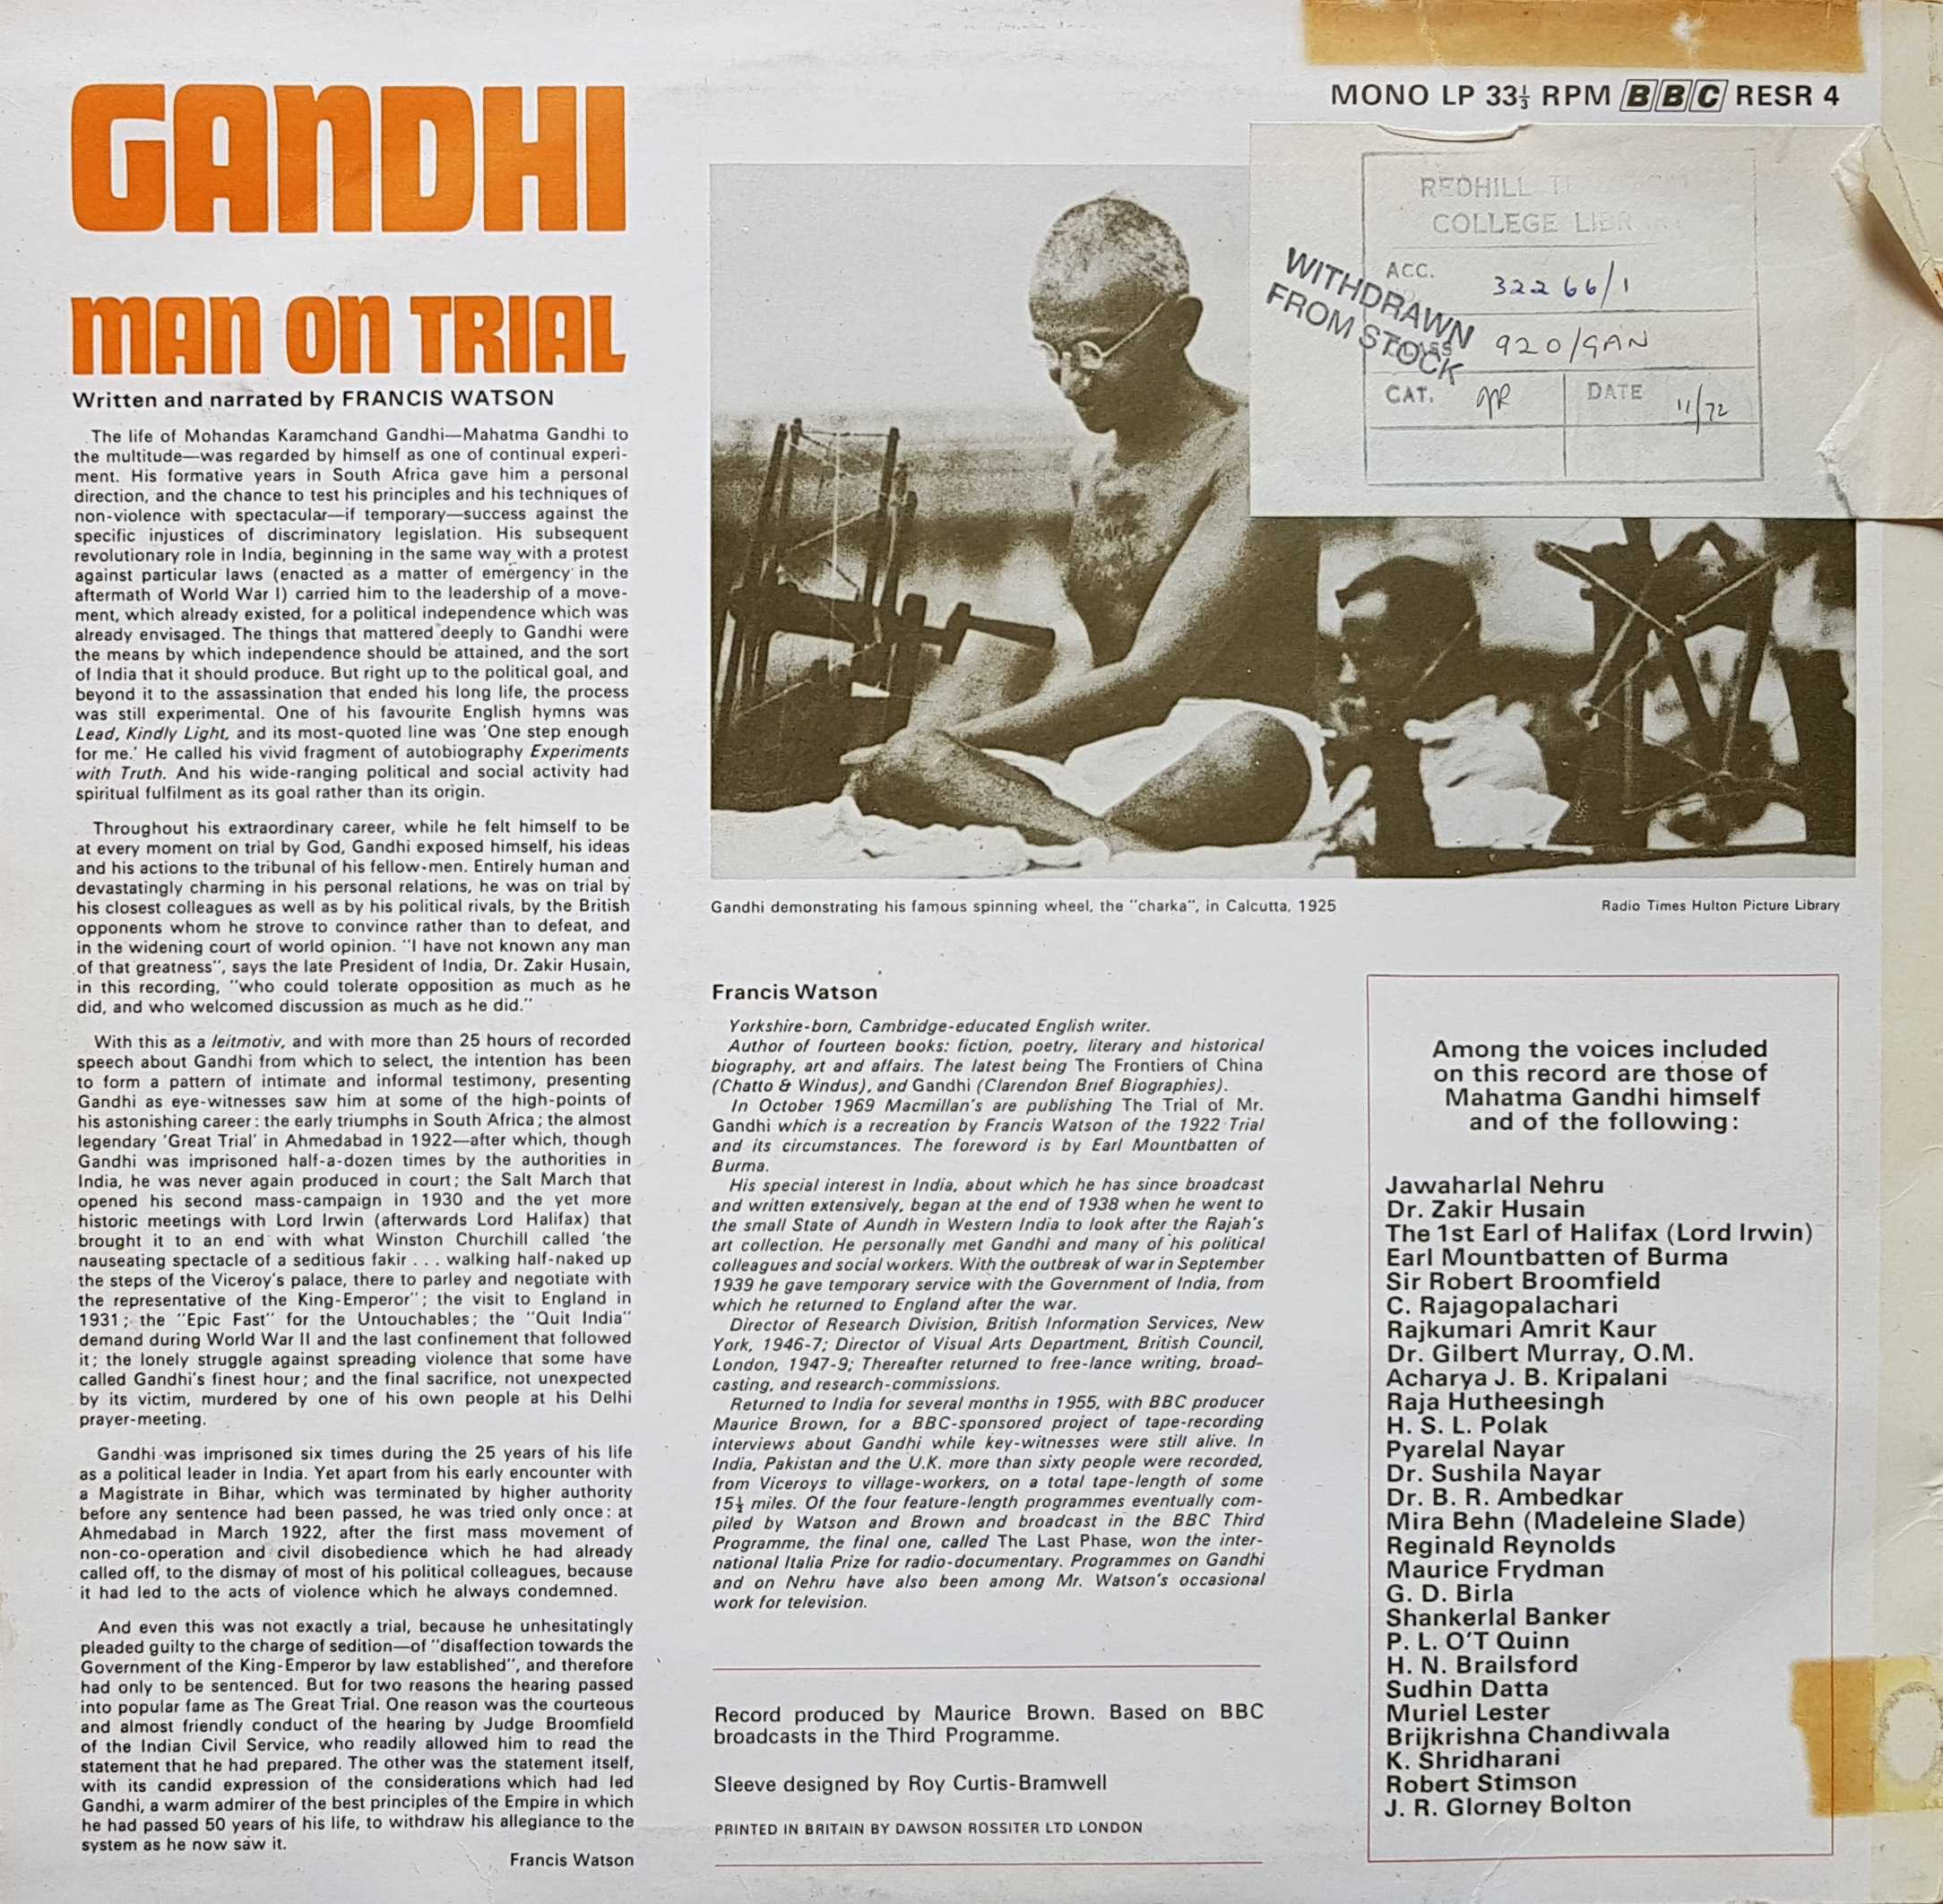 Picture of RESR 4 Gandhi - Man on trial by artist Francis Watson from the BBC records and Tapes library